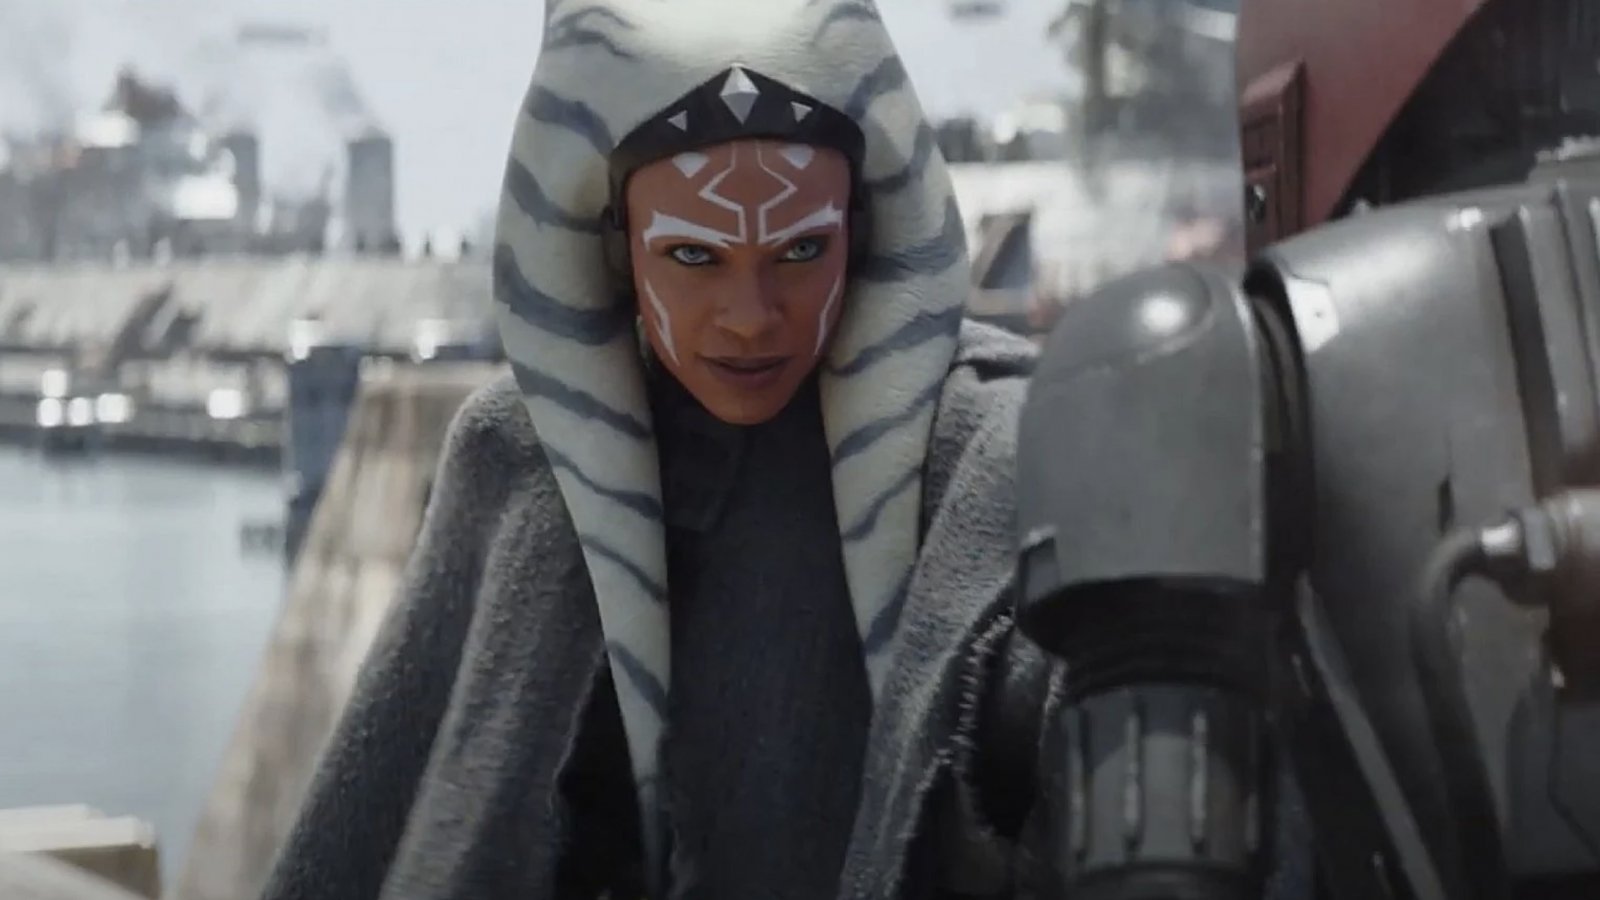 Ahsoka Timeline: When Is It Set? Is It a Sequel or Prequel to Mandalorian?